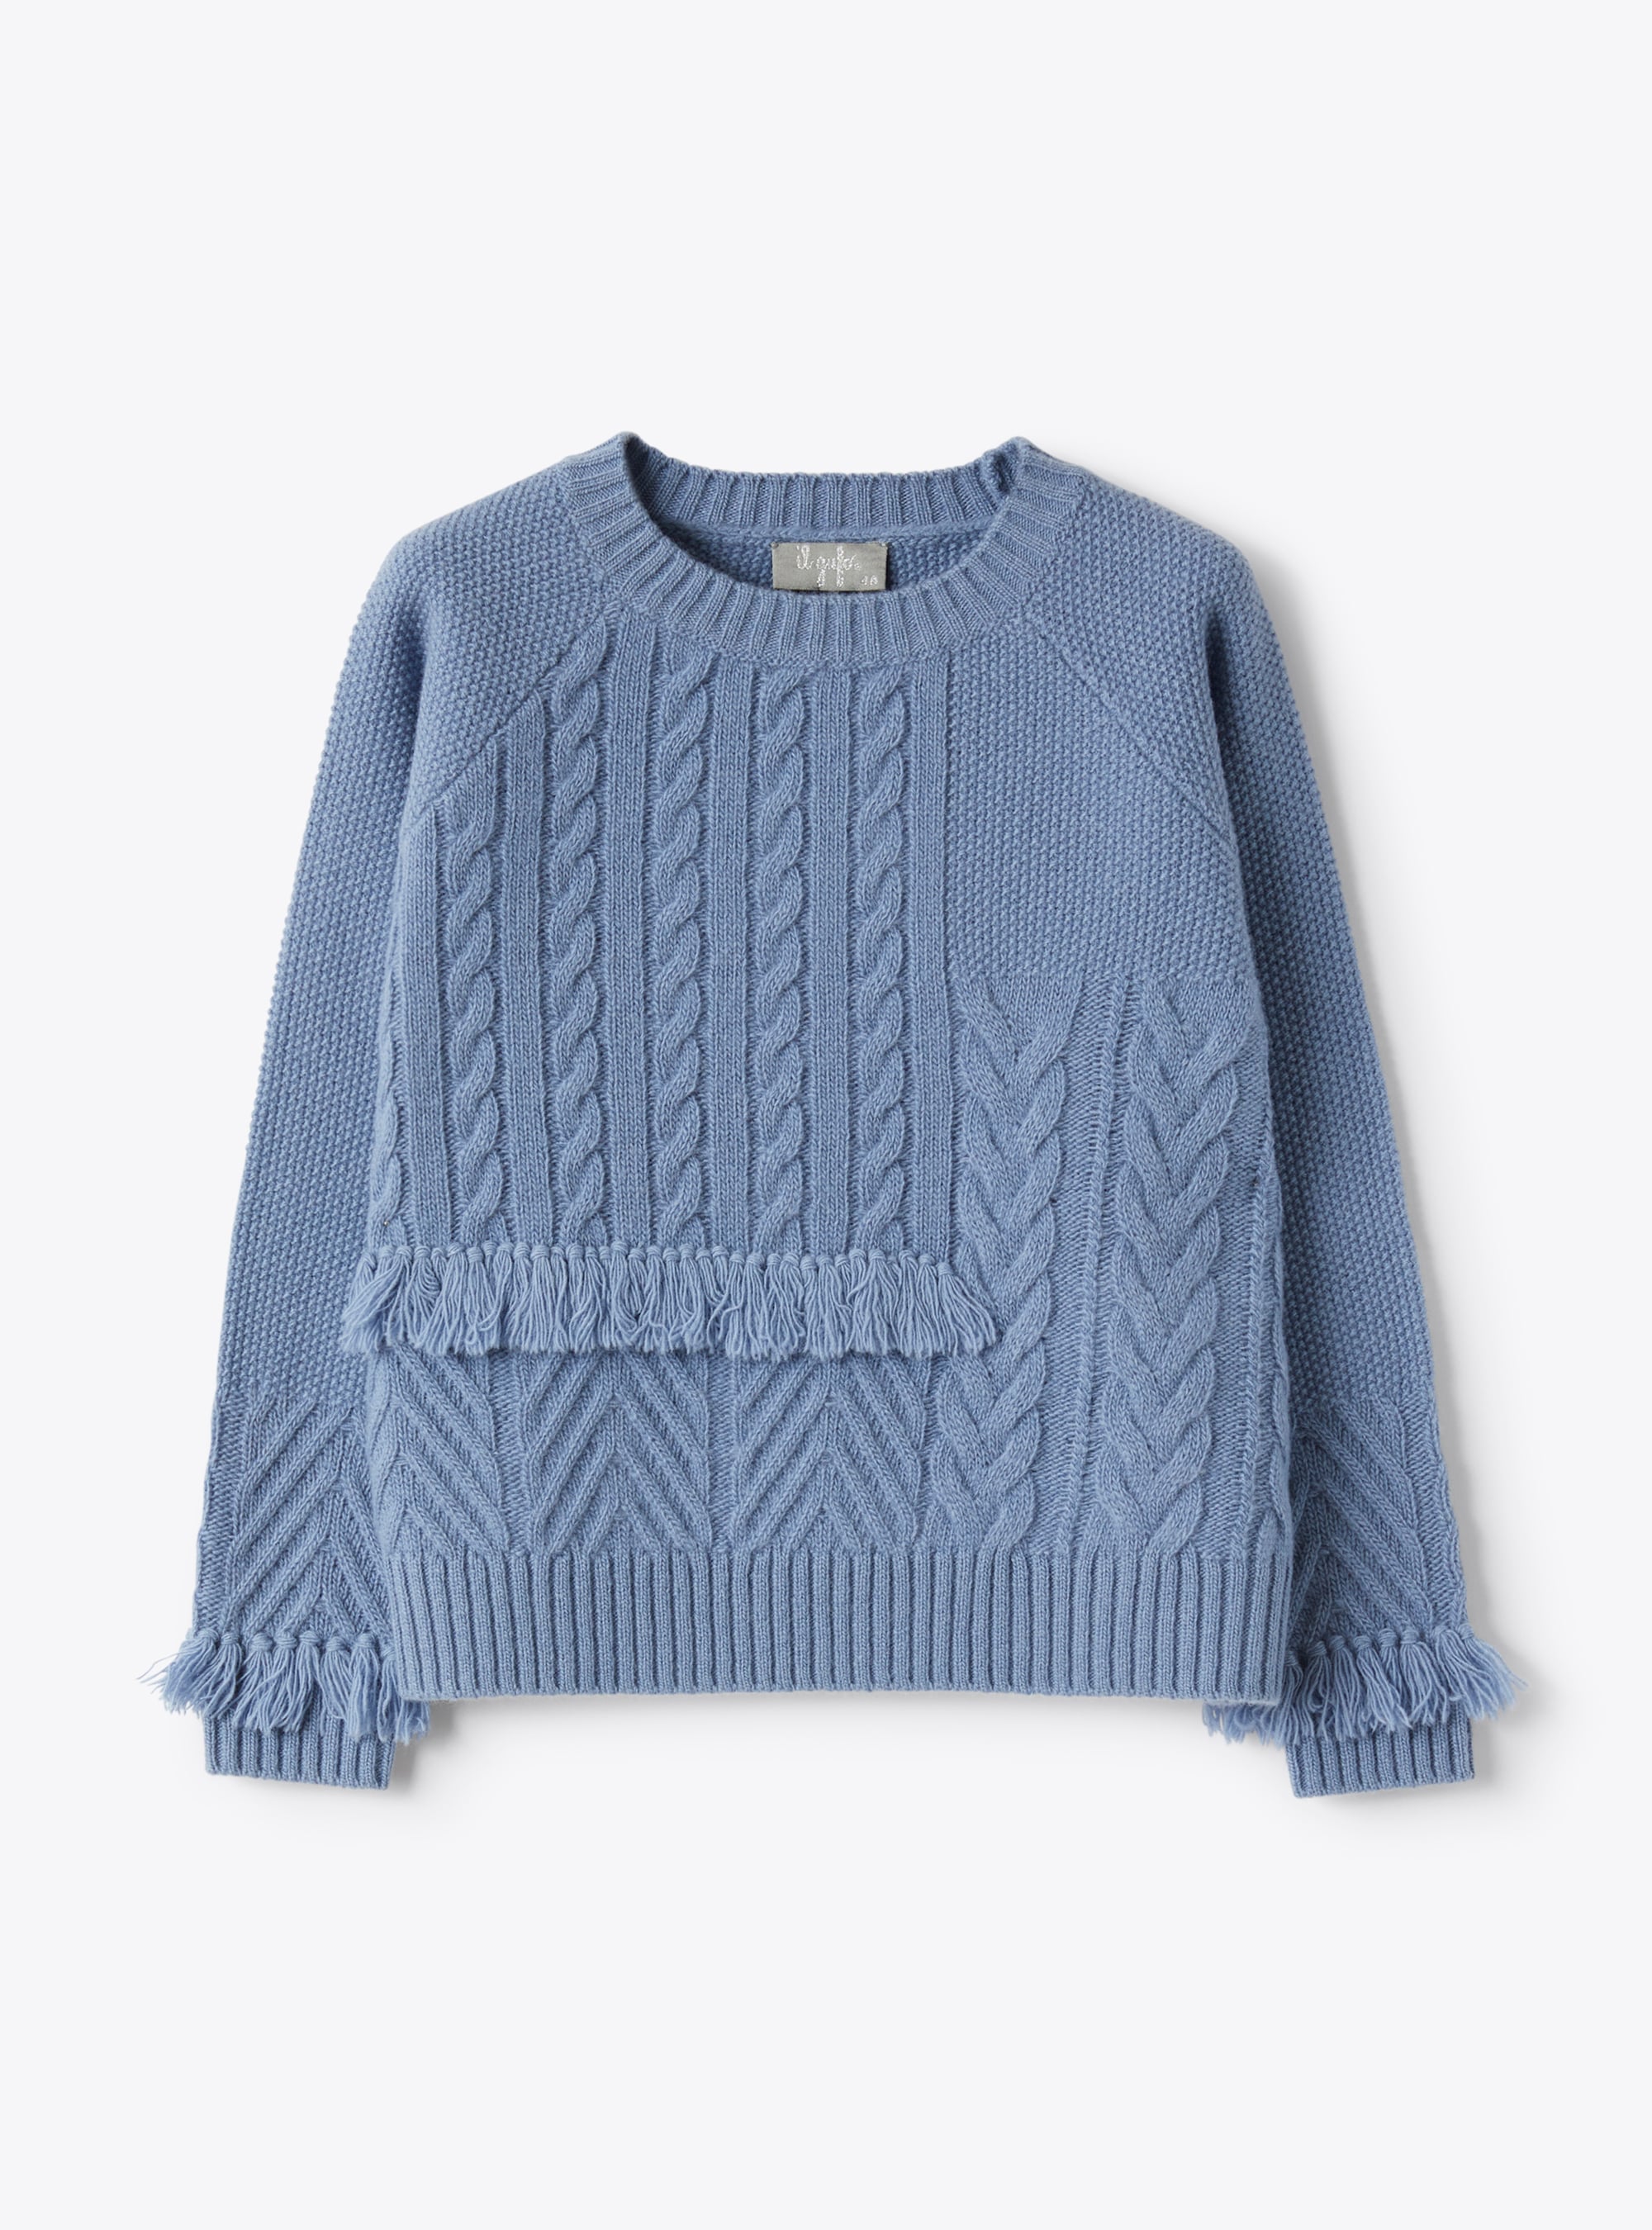 Round-neck sweater with cable patterning and fringed details | Il Gufo